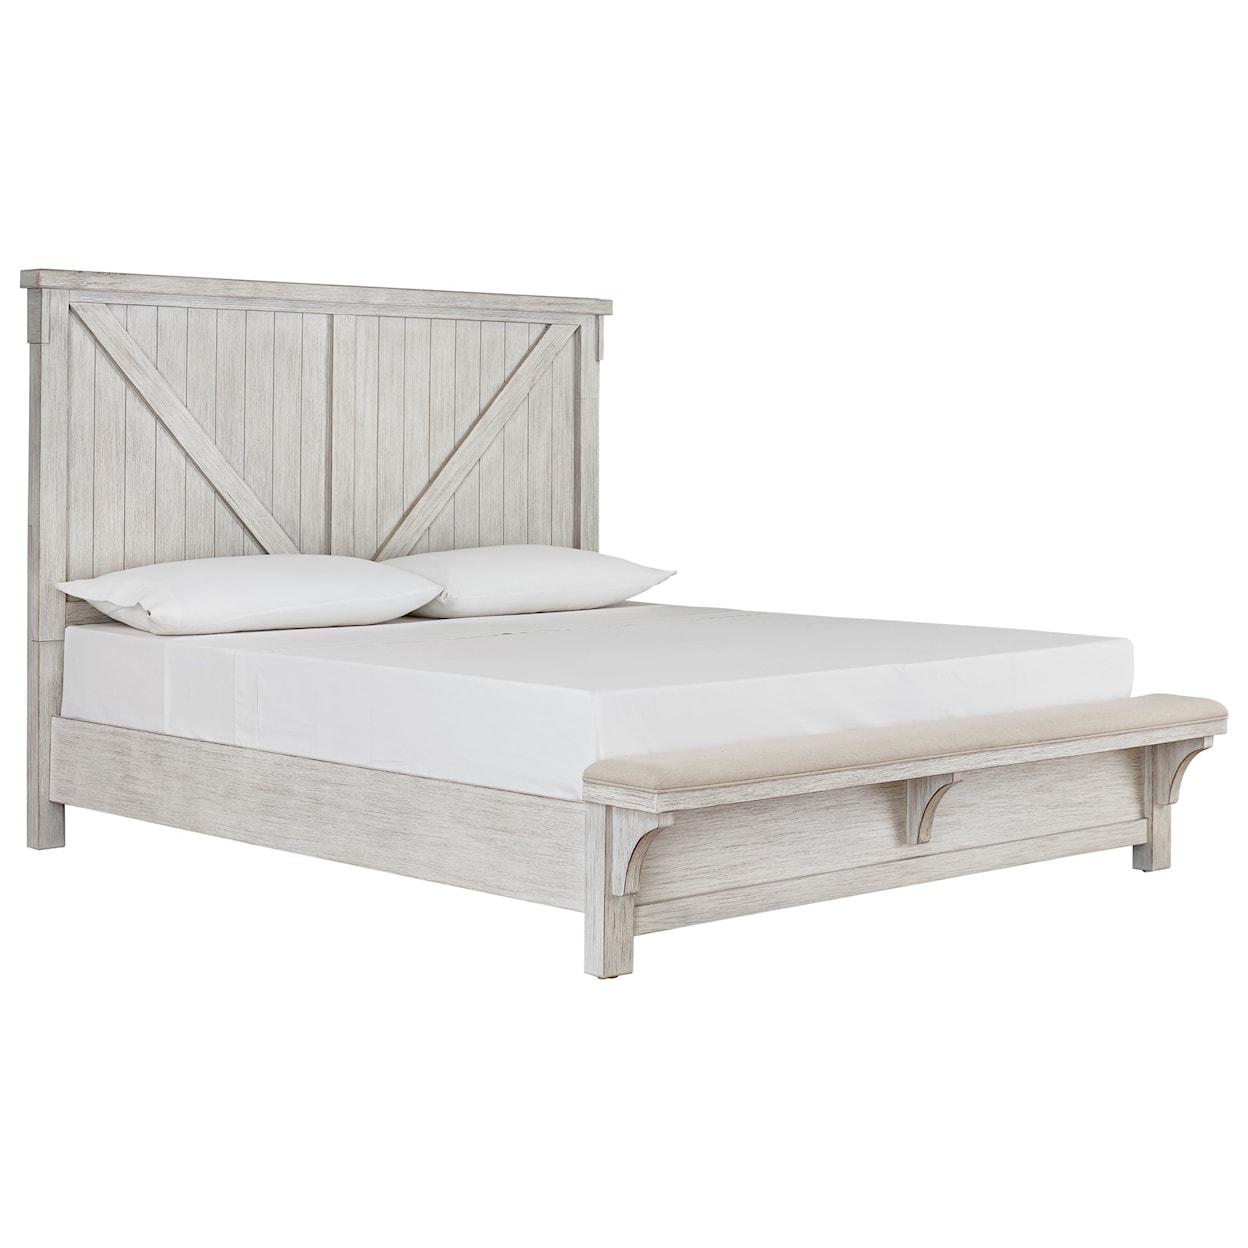 Ashley Signature Design Brashland Calfornia King Bed with Footboard Bench